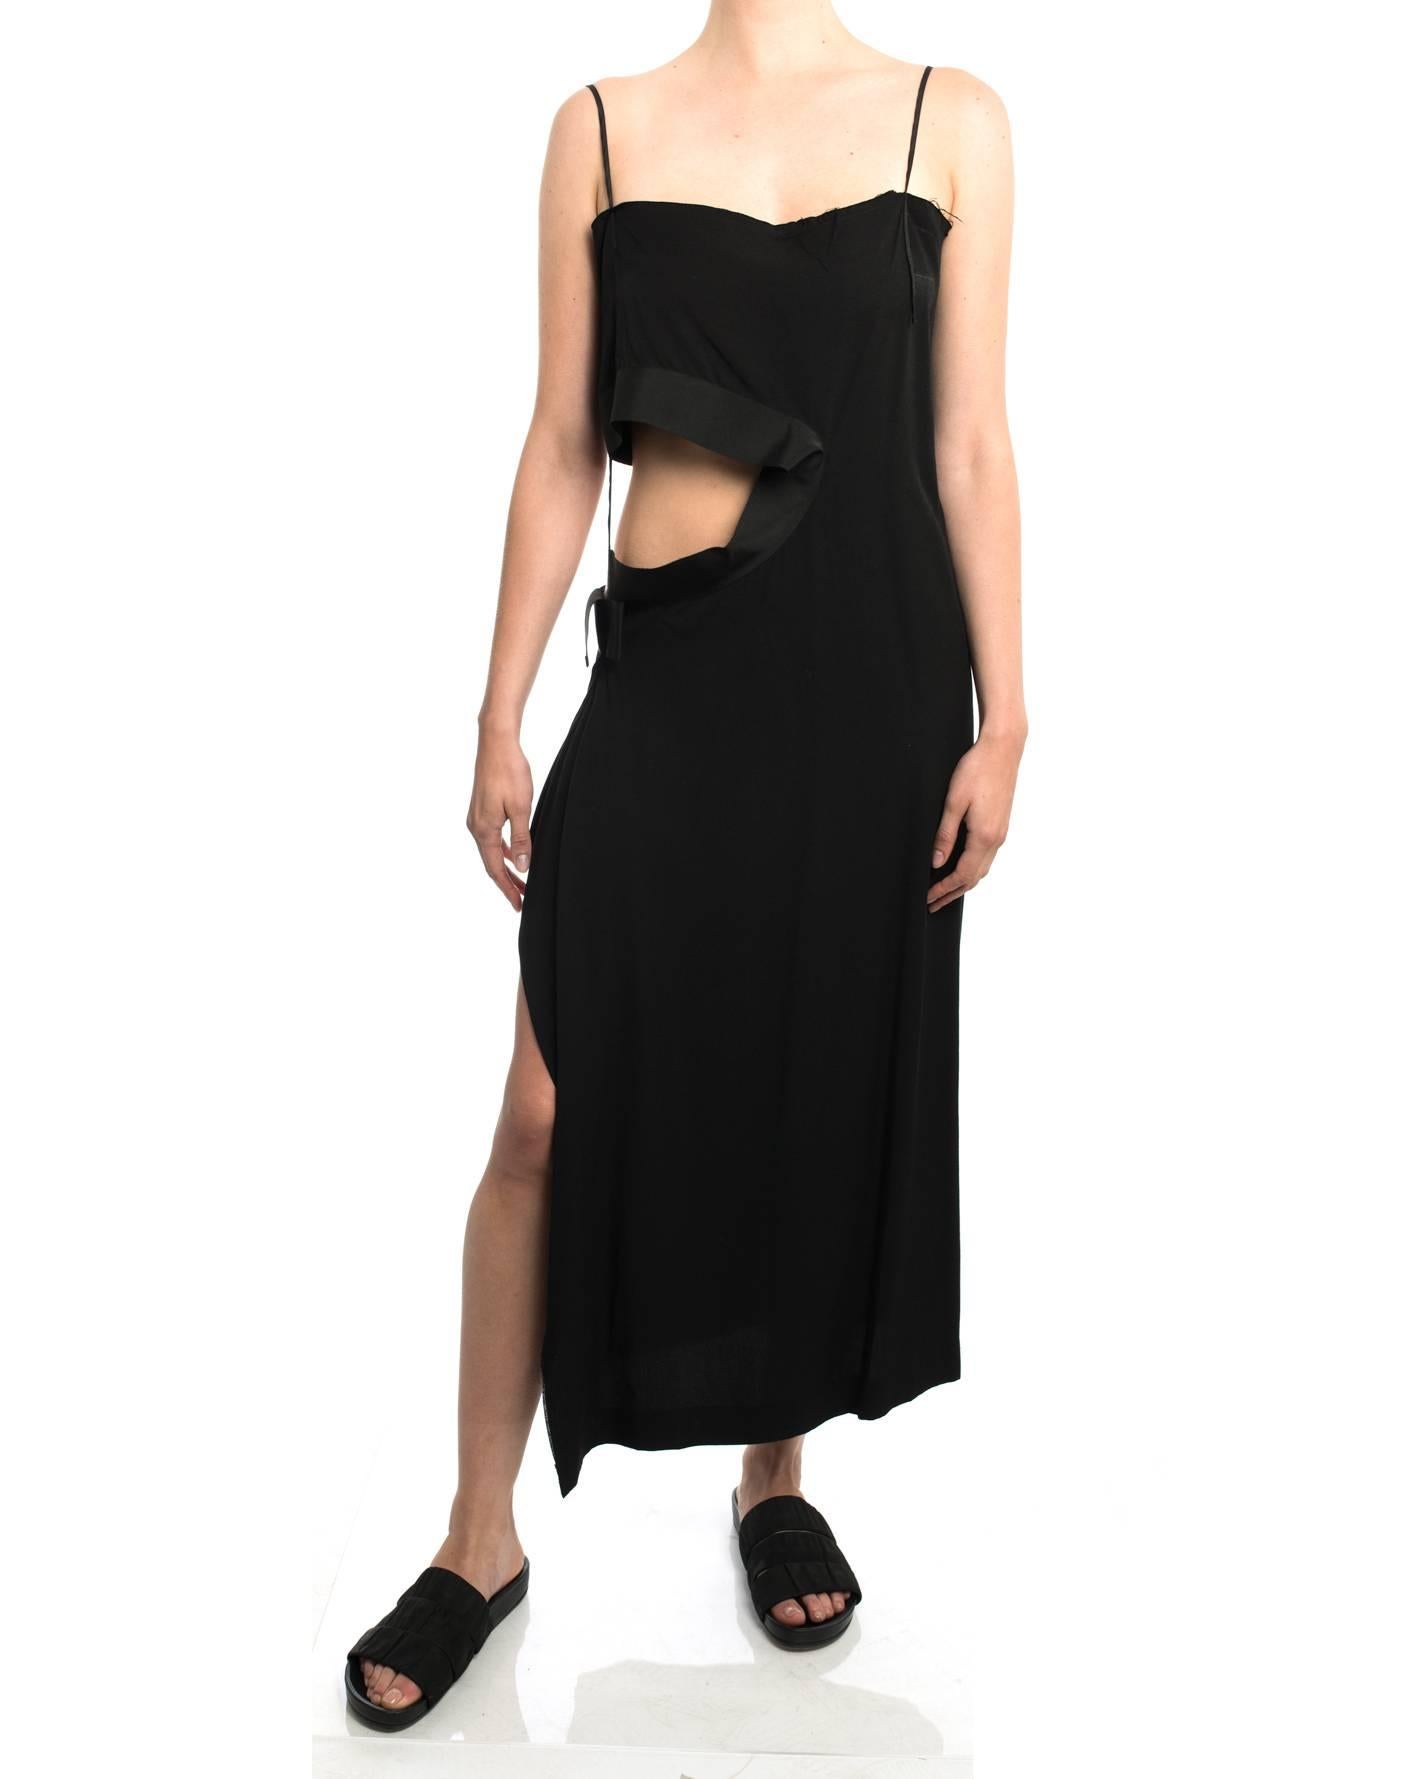 Yohji Yamamoto Spring 2004 black cut-out waist dress. Straight- cut column design with shoulder straps. Cut-out at left side is trimmed with wide grosgrain ribbon. Pull-over design with no zippers or closures. Tagged size Yohji 1 - best for about